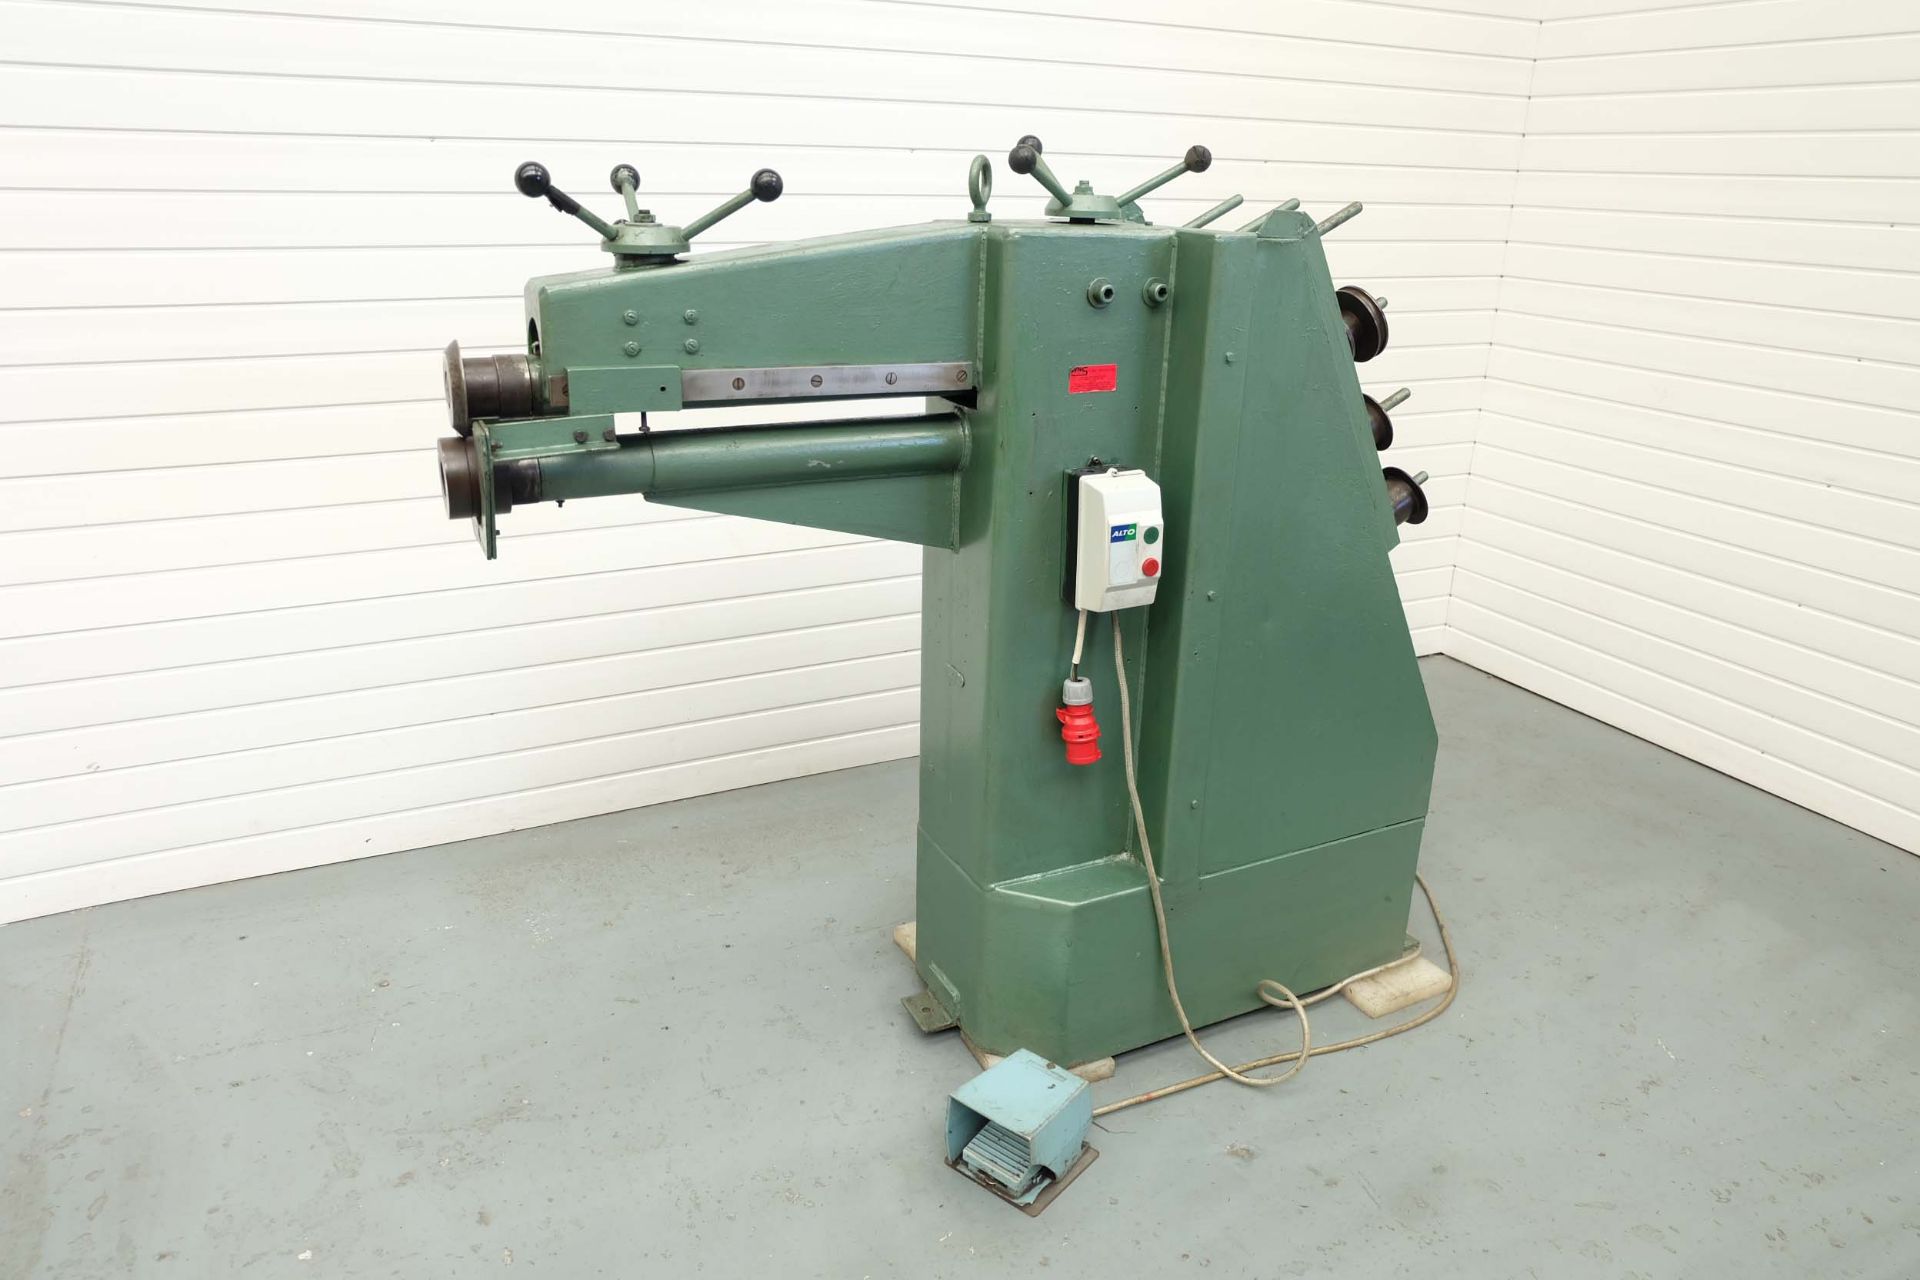 Power Swaging Machine. Throat 700mm. Spindle Size: 32mm Diameter. With Tooling & Foot Control.